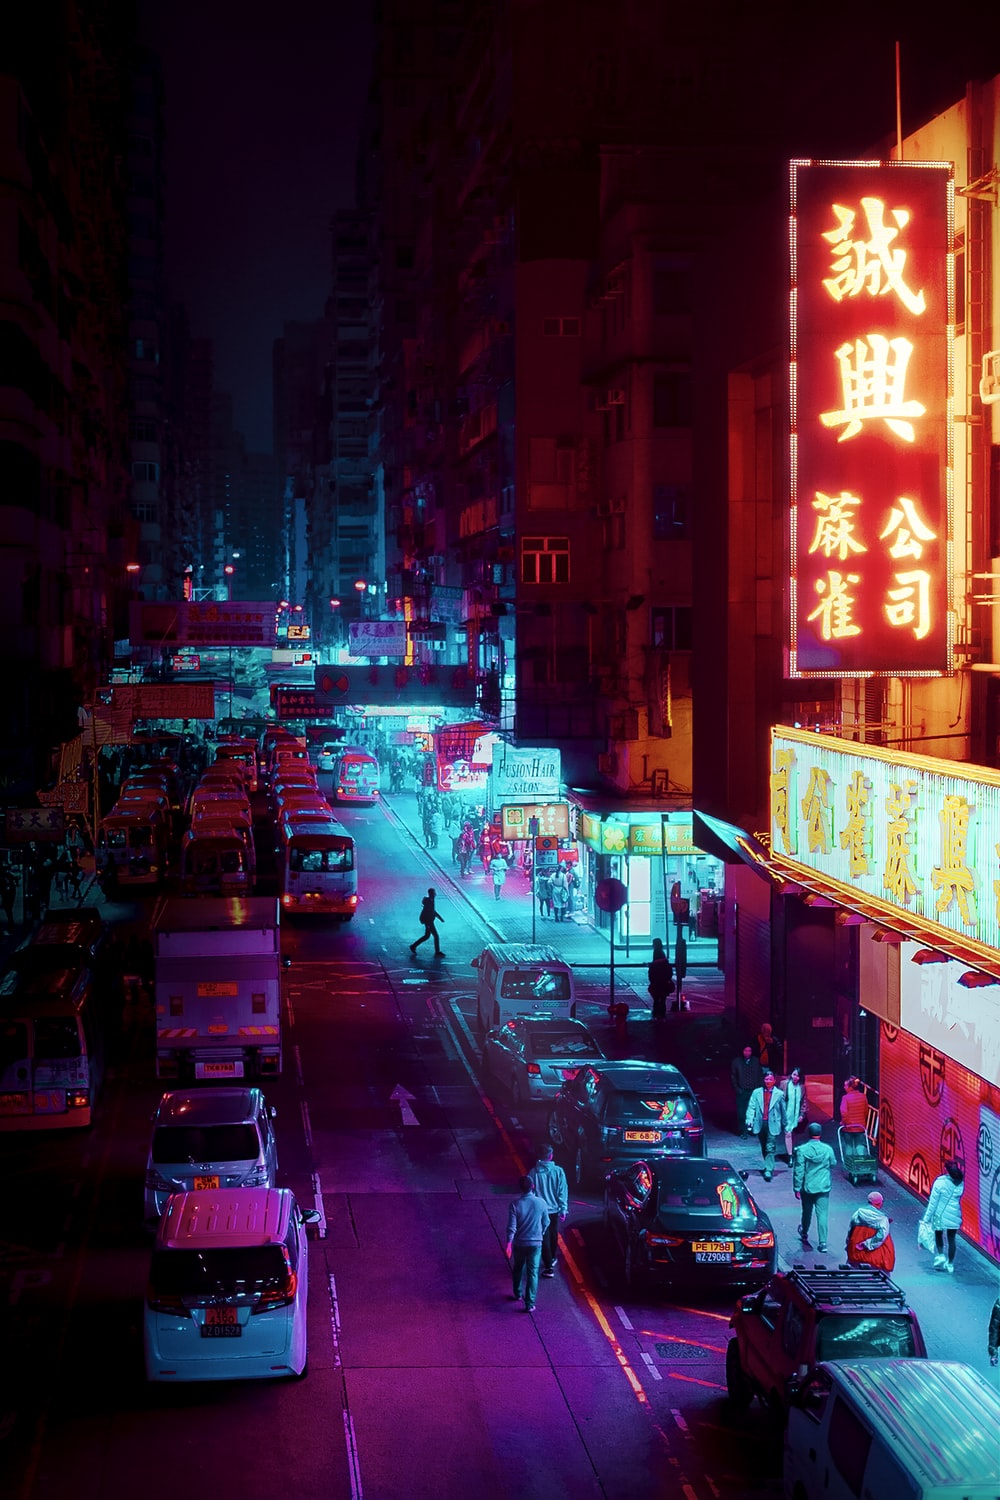 Neo Noir Picture. Download Free Image